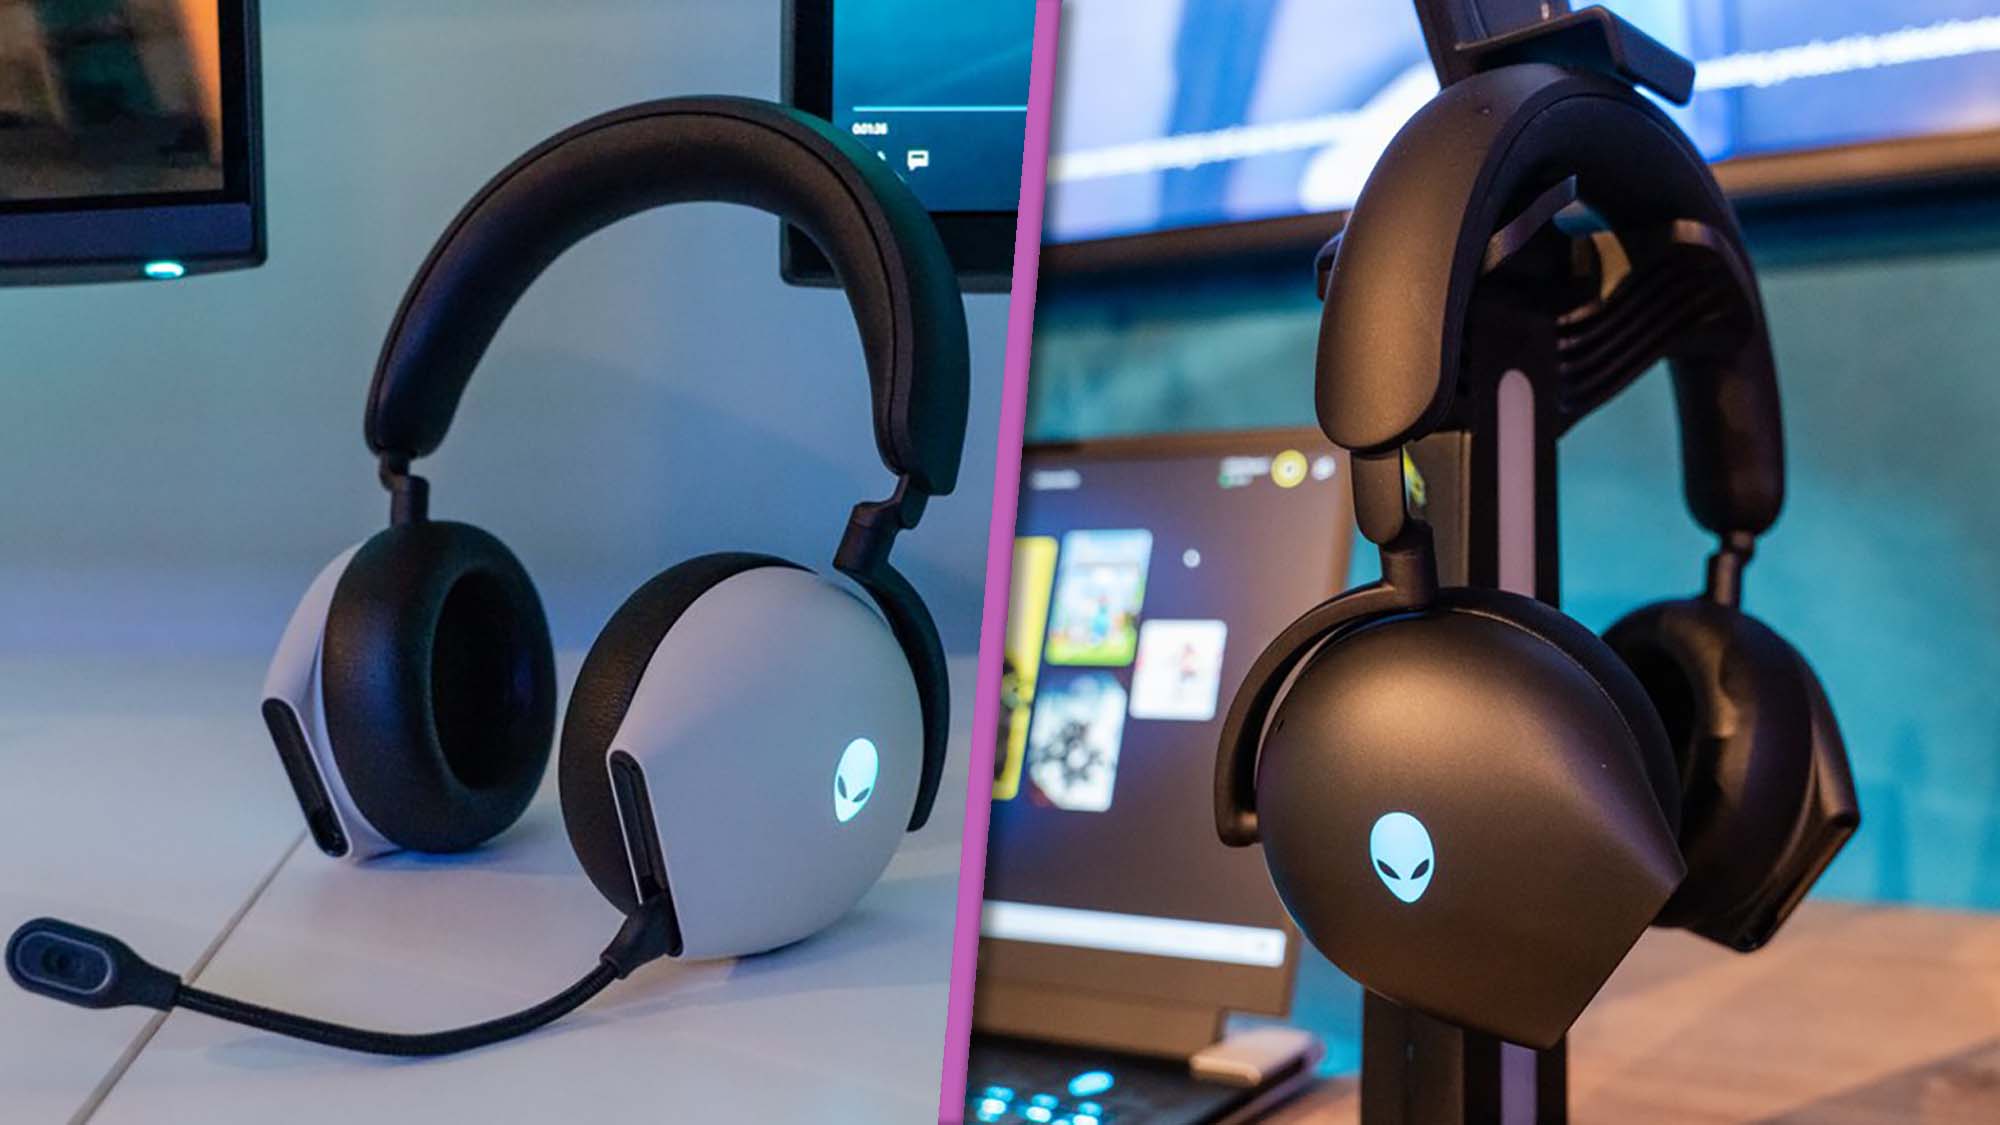 A side-by-side view of Alienware Tri-Mode wireless gaming headsets in white and black color options